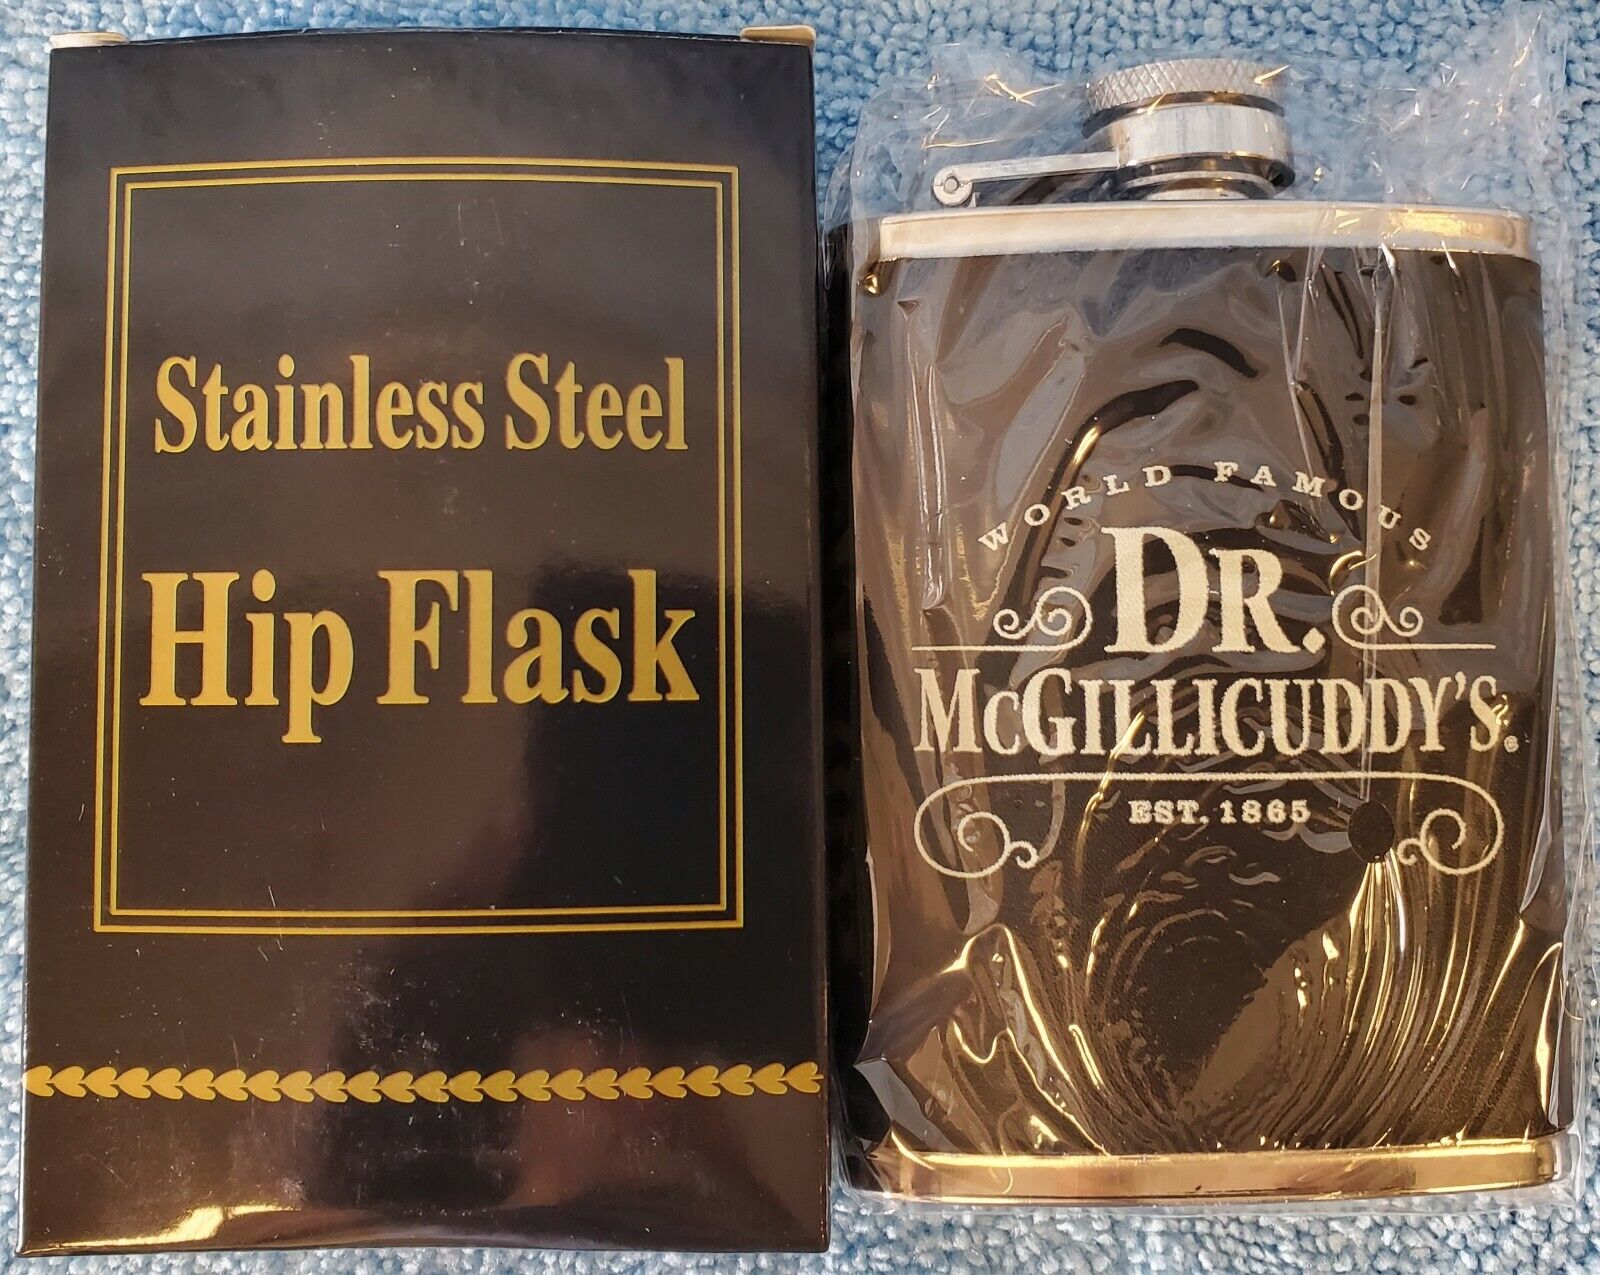 Dr. McGillicuddy's Metal 4oz Wrapped Hip Flask Breast Pocket Stainless Steel NEW